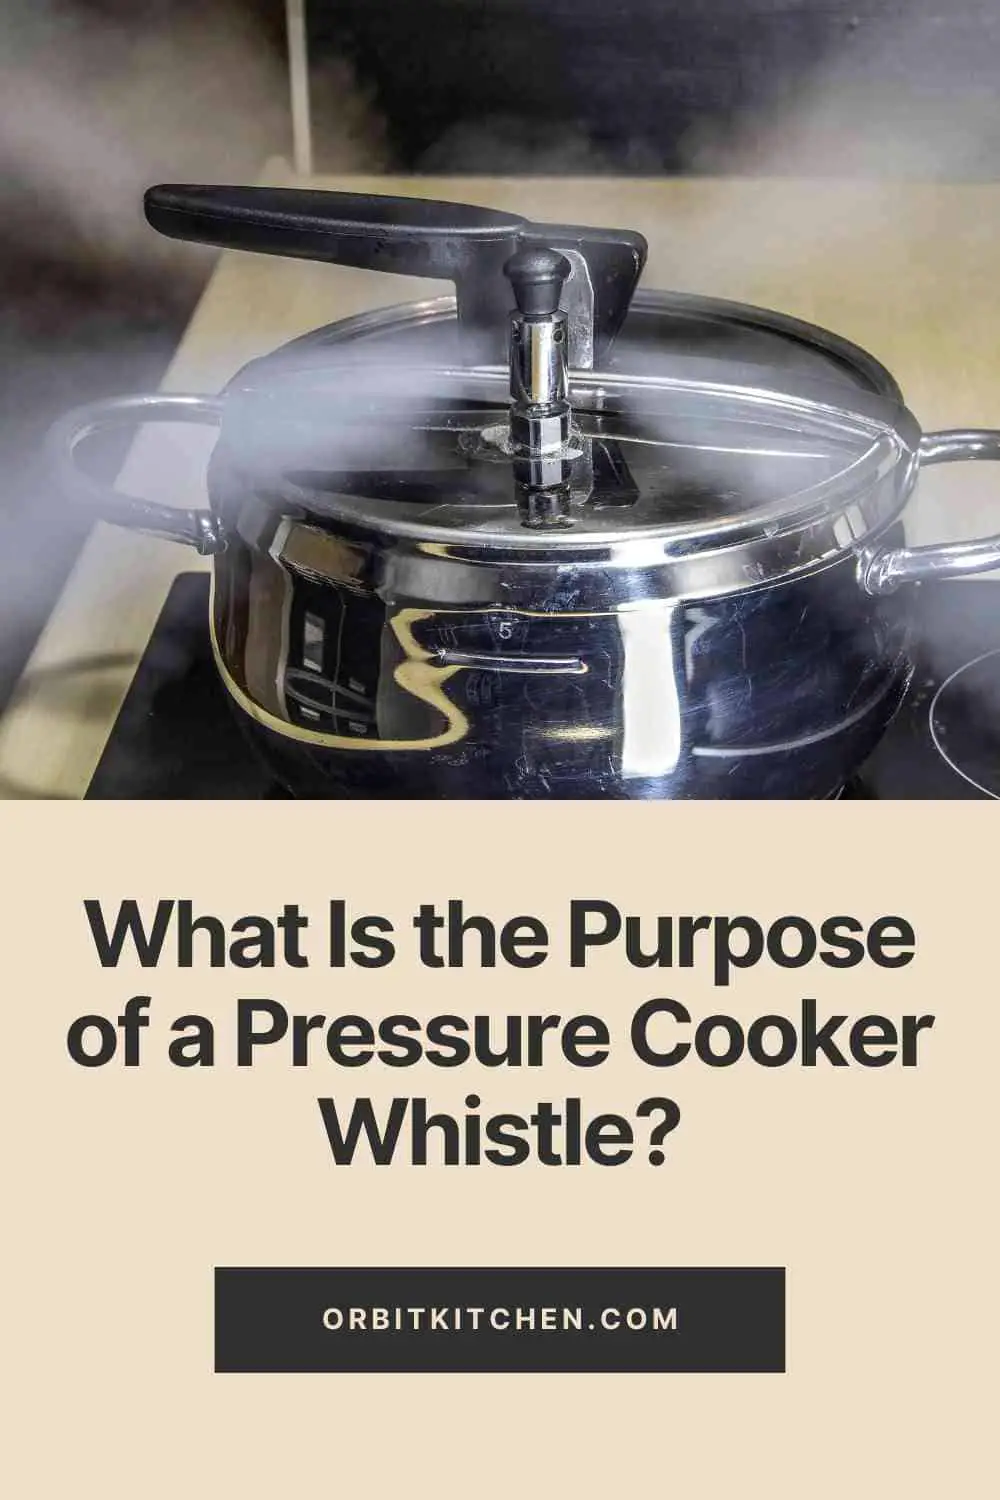 What Is the Purpose of a Pressure Cooker Whistle